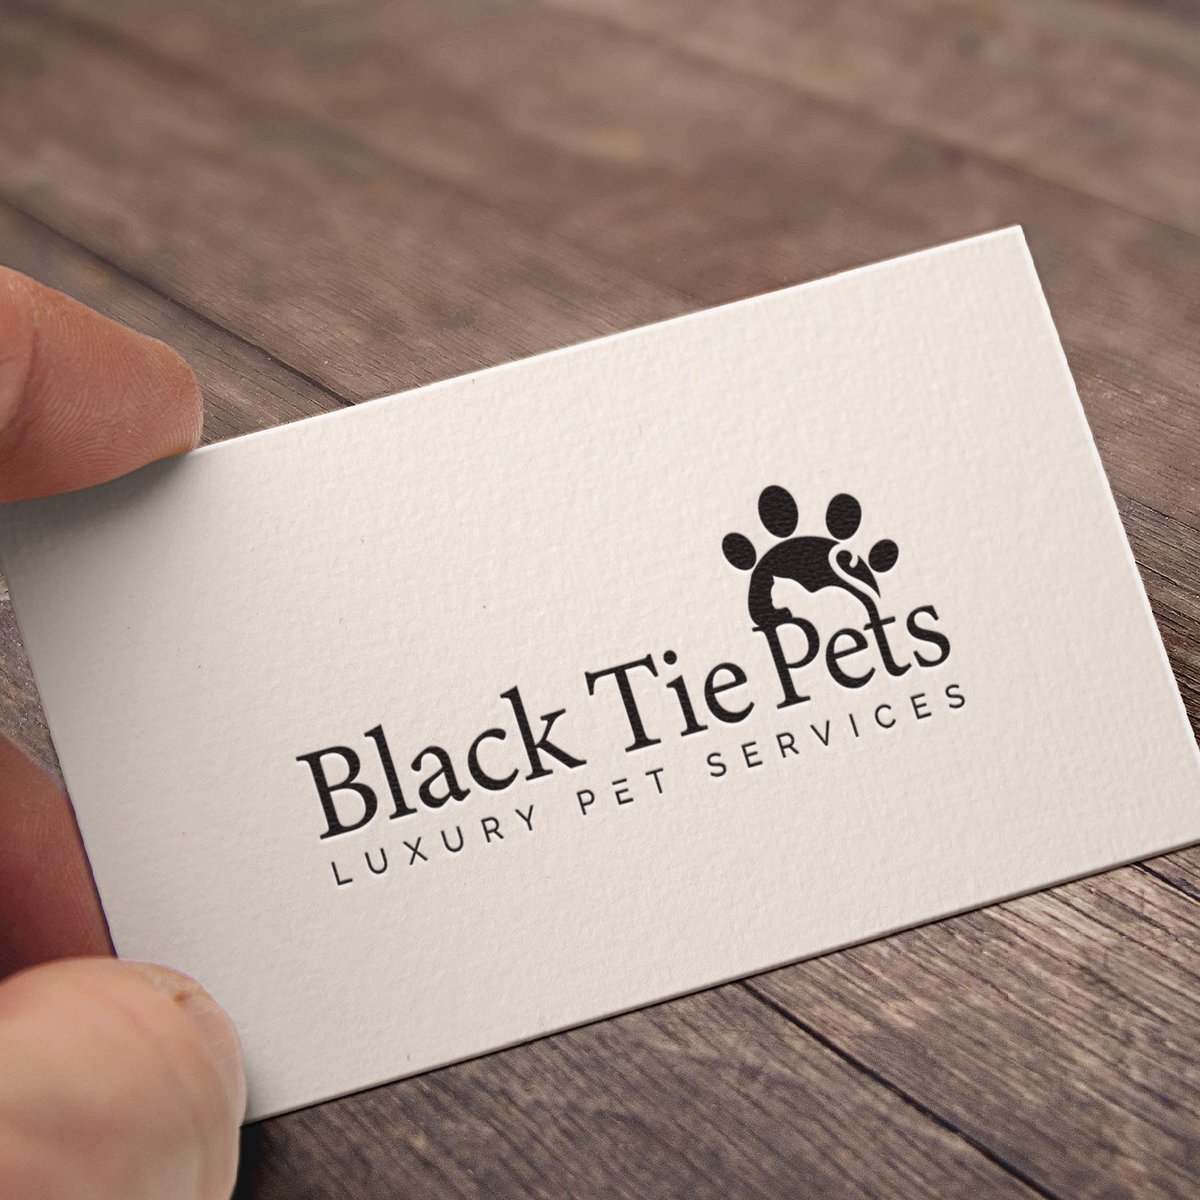 I can also help you in designing #logodesign #Businesscard #Letterhead,#Socialmediacover according to your requirement? fiverr.com/share/8zvz6z
#InoueDonaire #Grealish #Delph #Southgate #ThursdayThoughts #WBSS